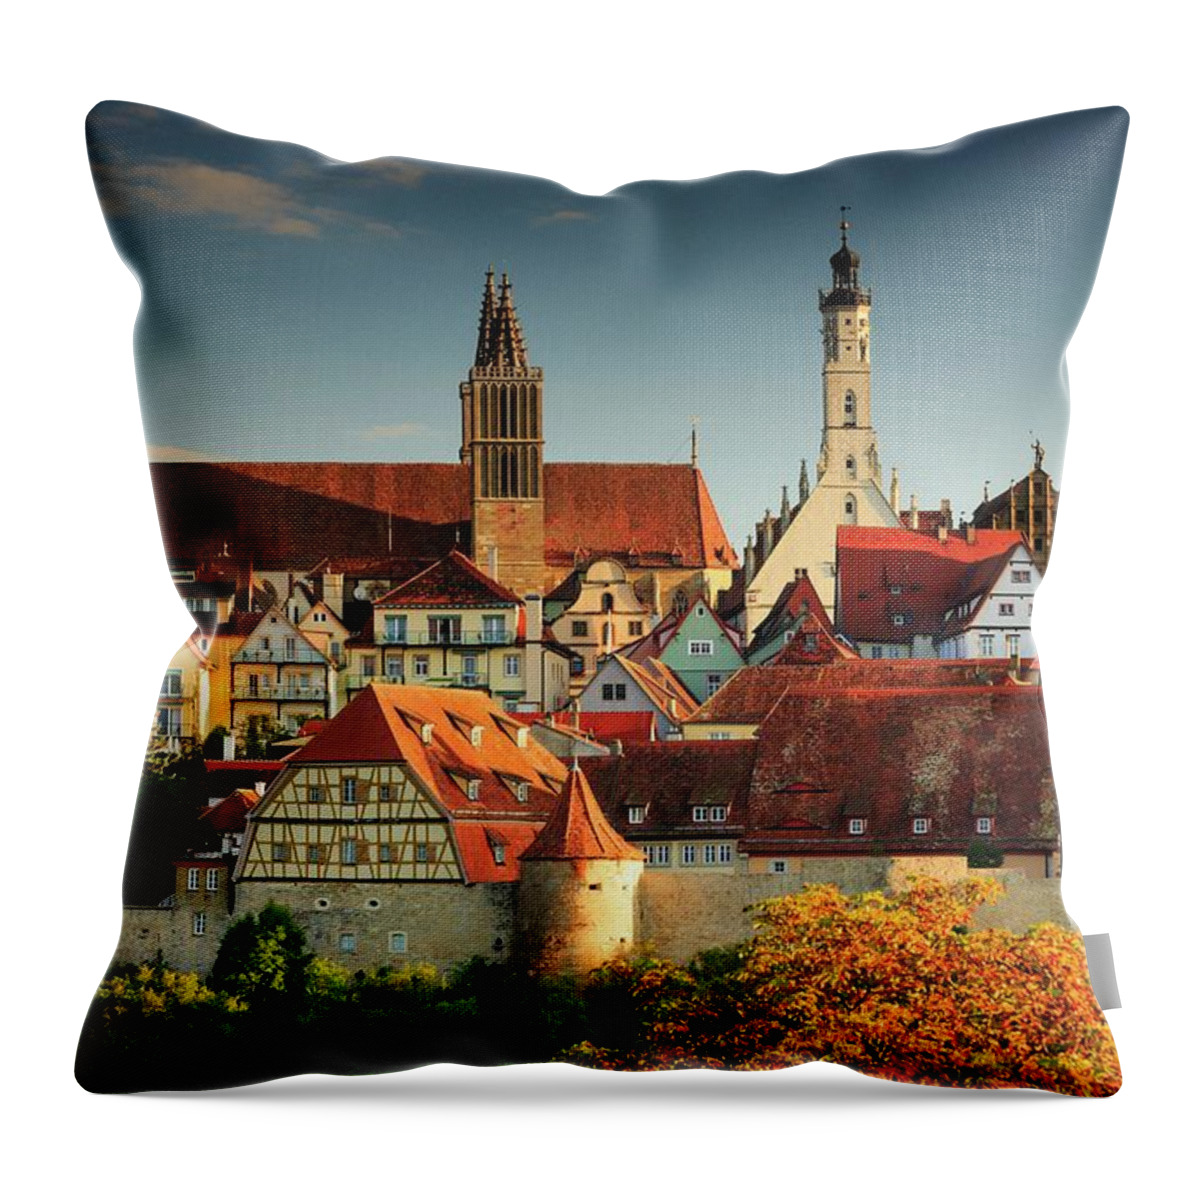 Estock Throw Pillow featuring the digital art Germany, Bavaria, Middle Franconia, Rothenburg Ob Der Tauber, Panoramic View by Maurizio Rellini